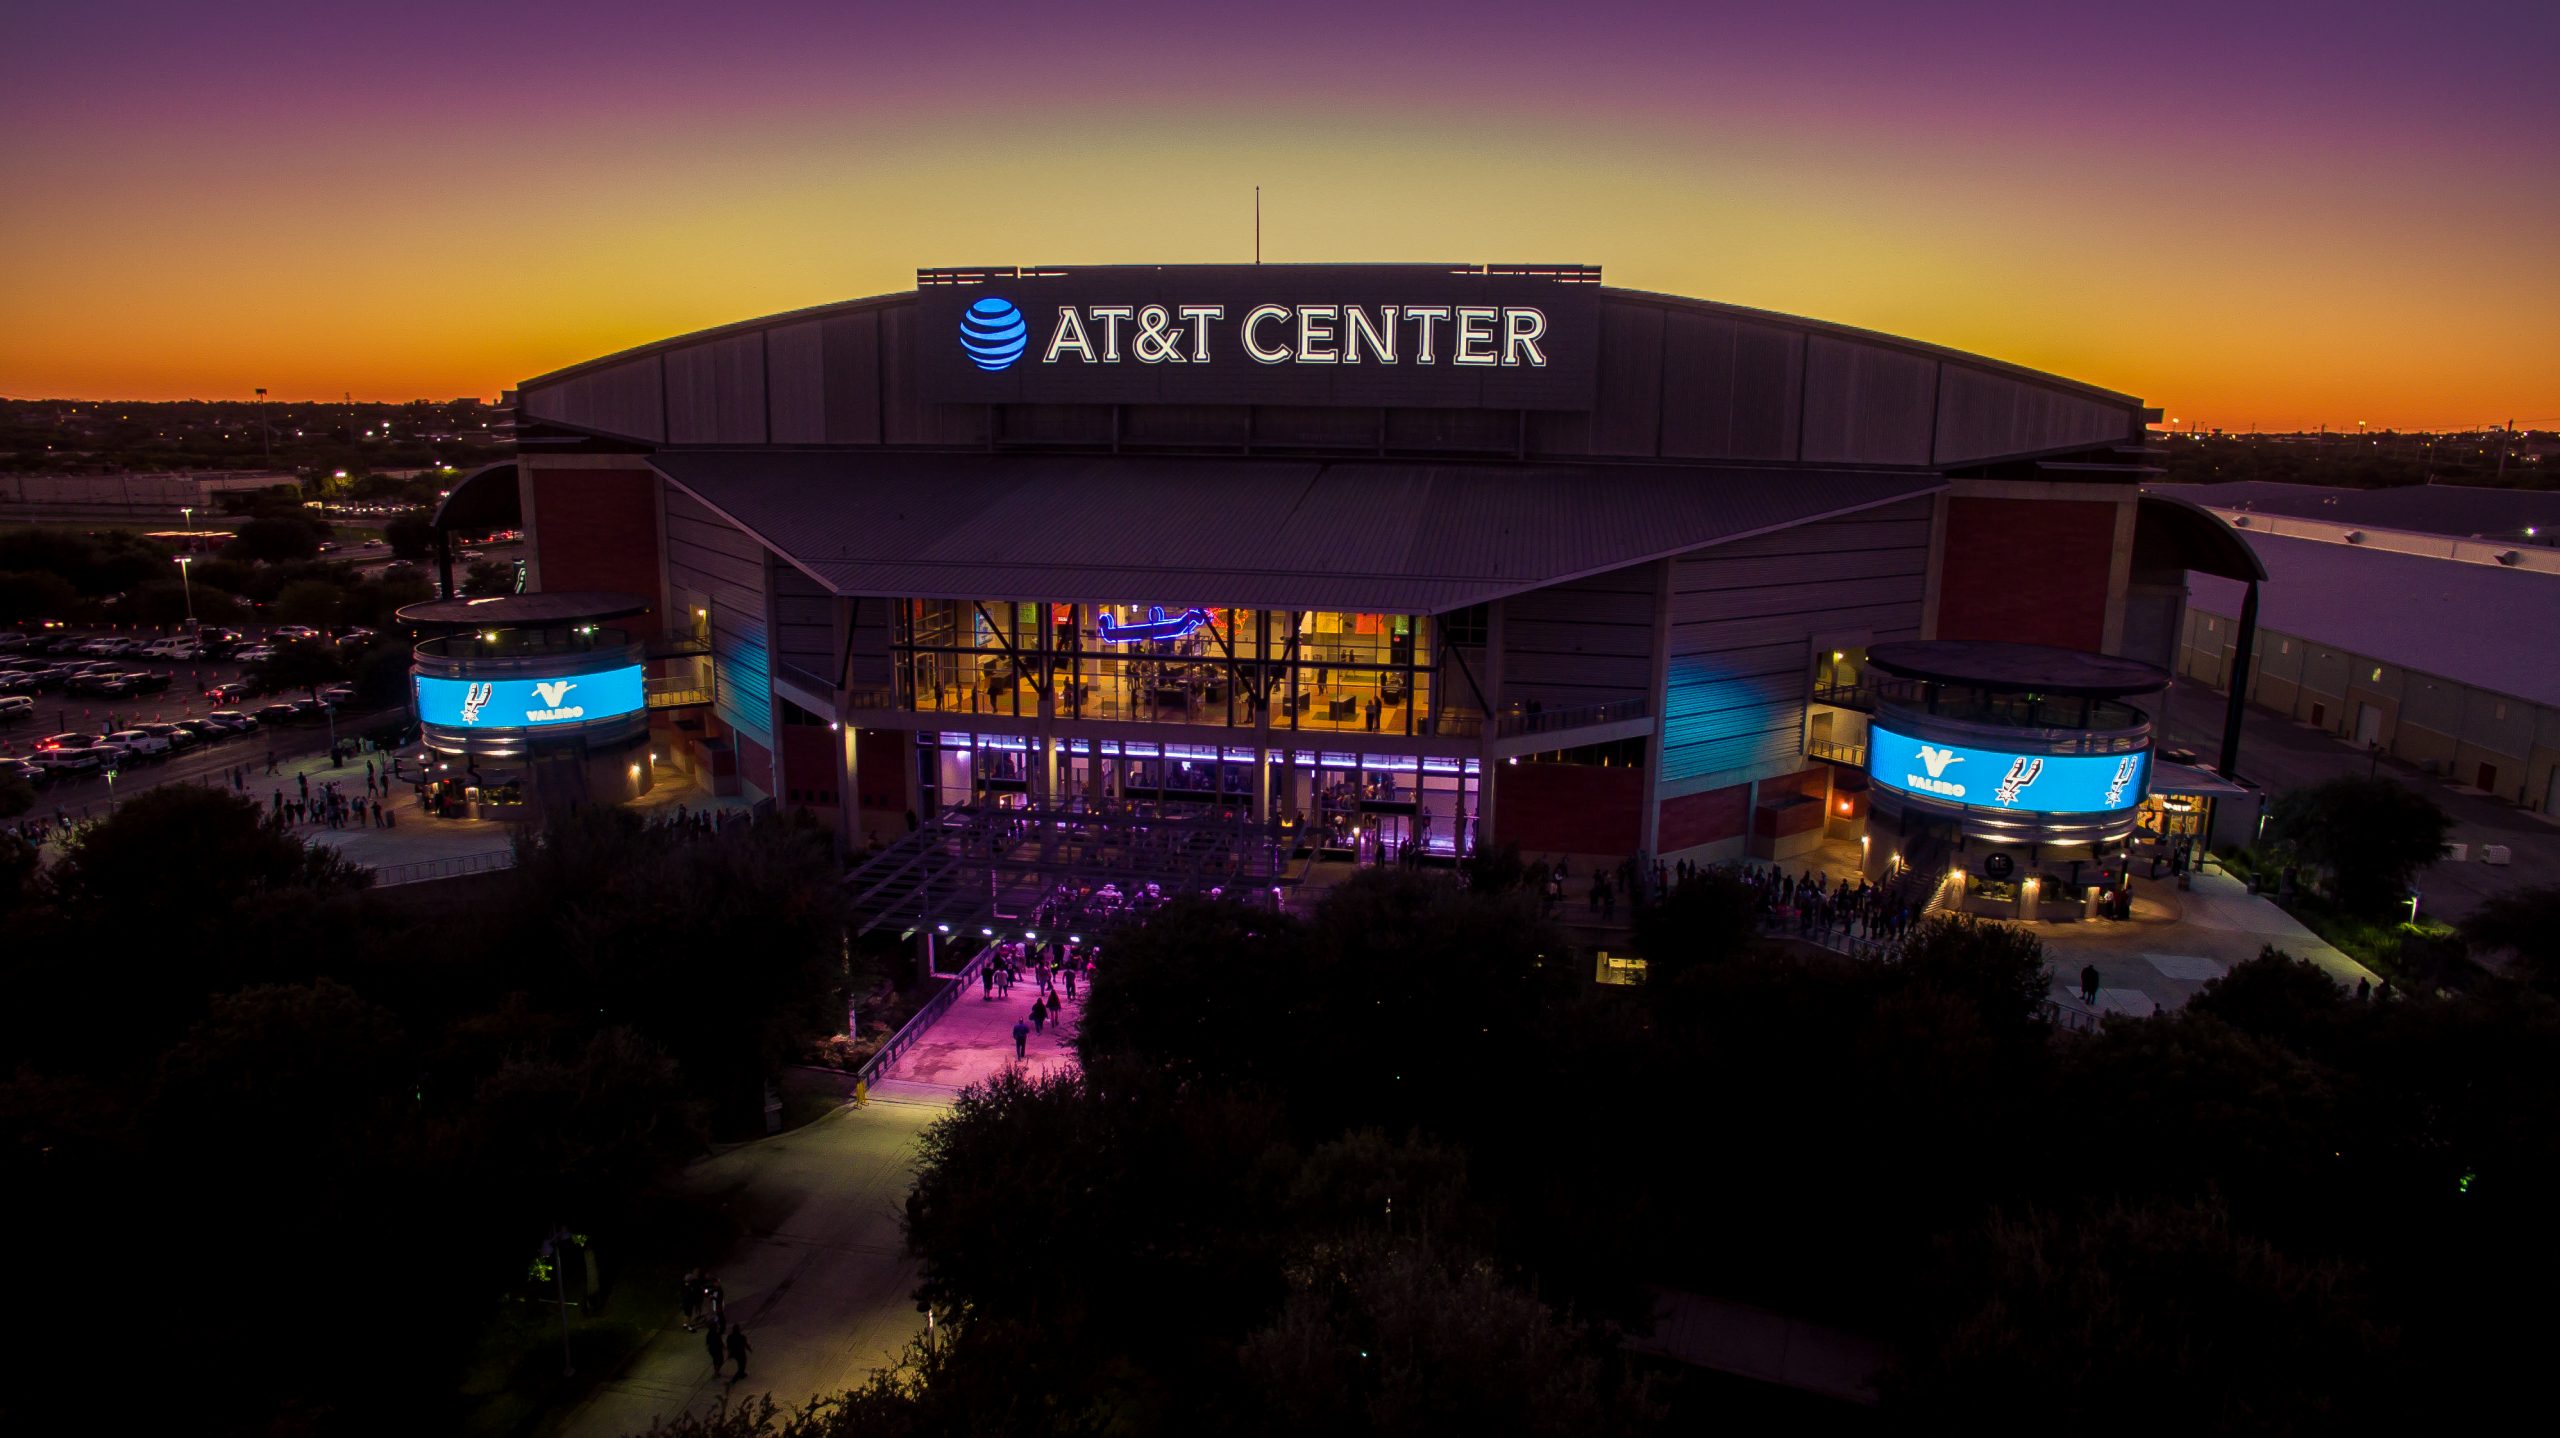 Spurs' AT&T Center Goes Cashless To Create Cleaner Fan Experience